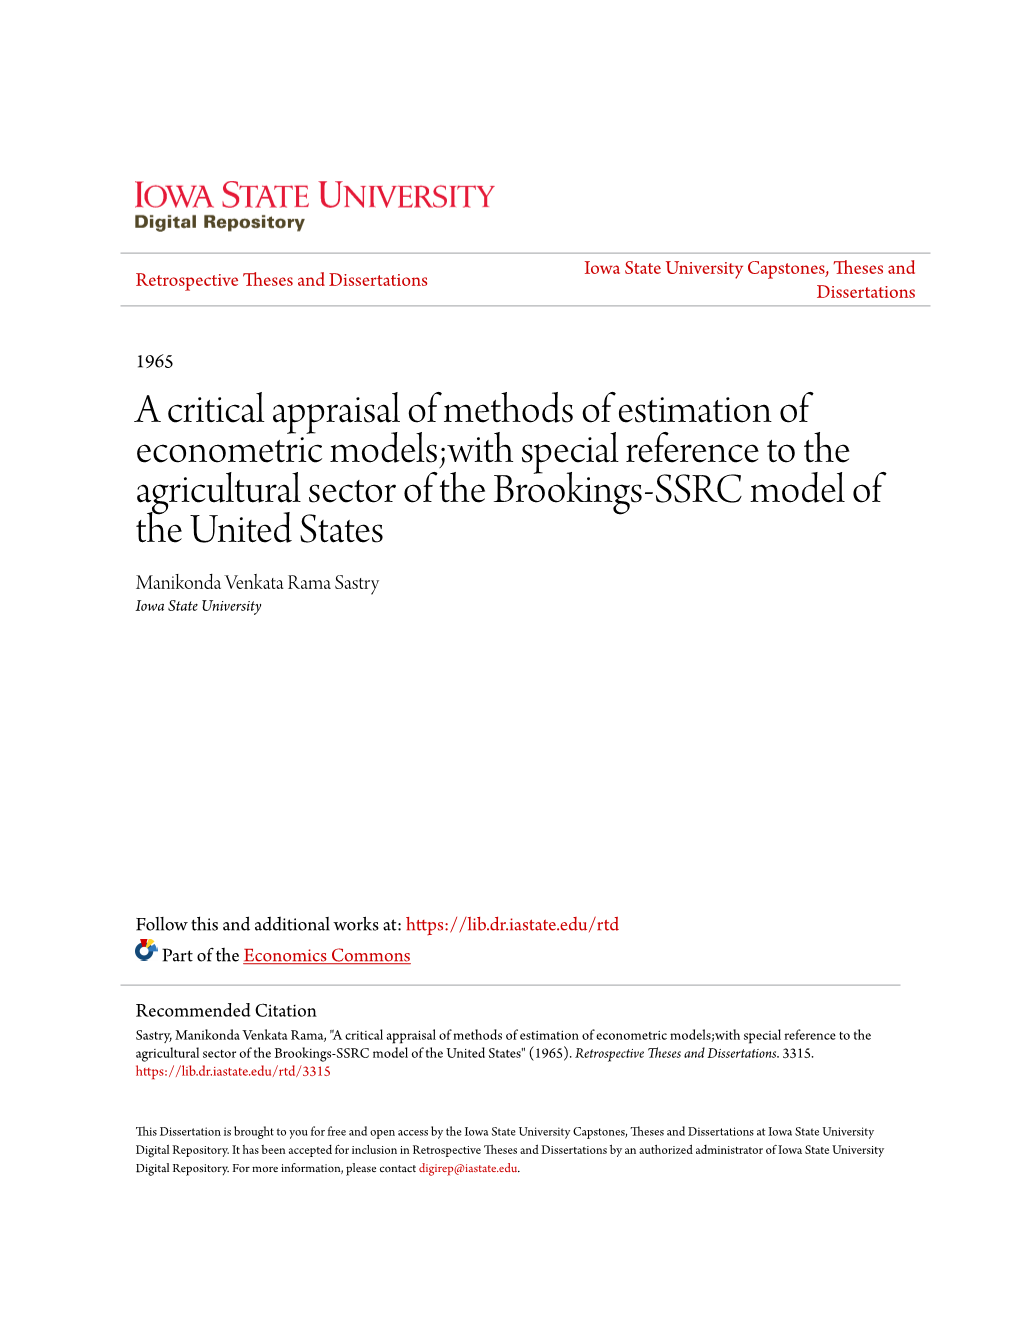 A Critical Appraisal of Methods of Estimation of Econometric Models